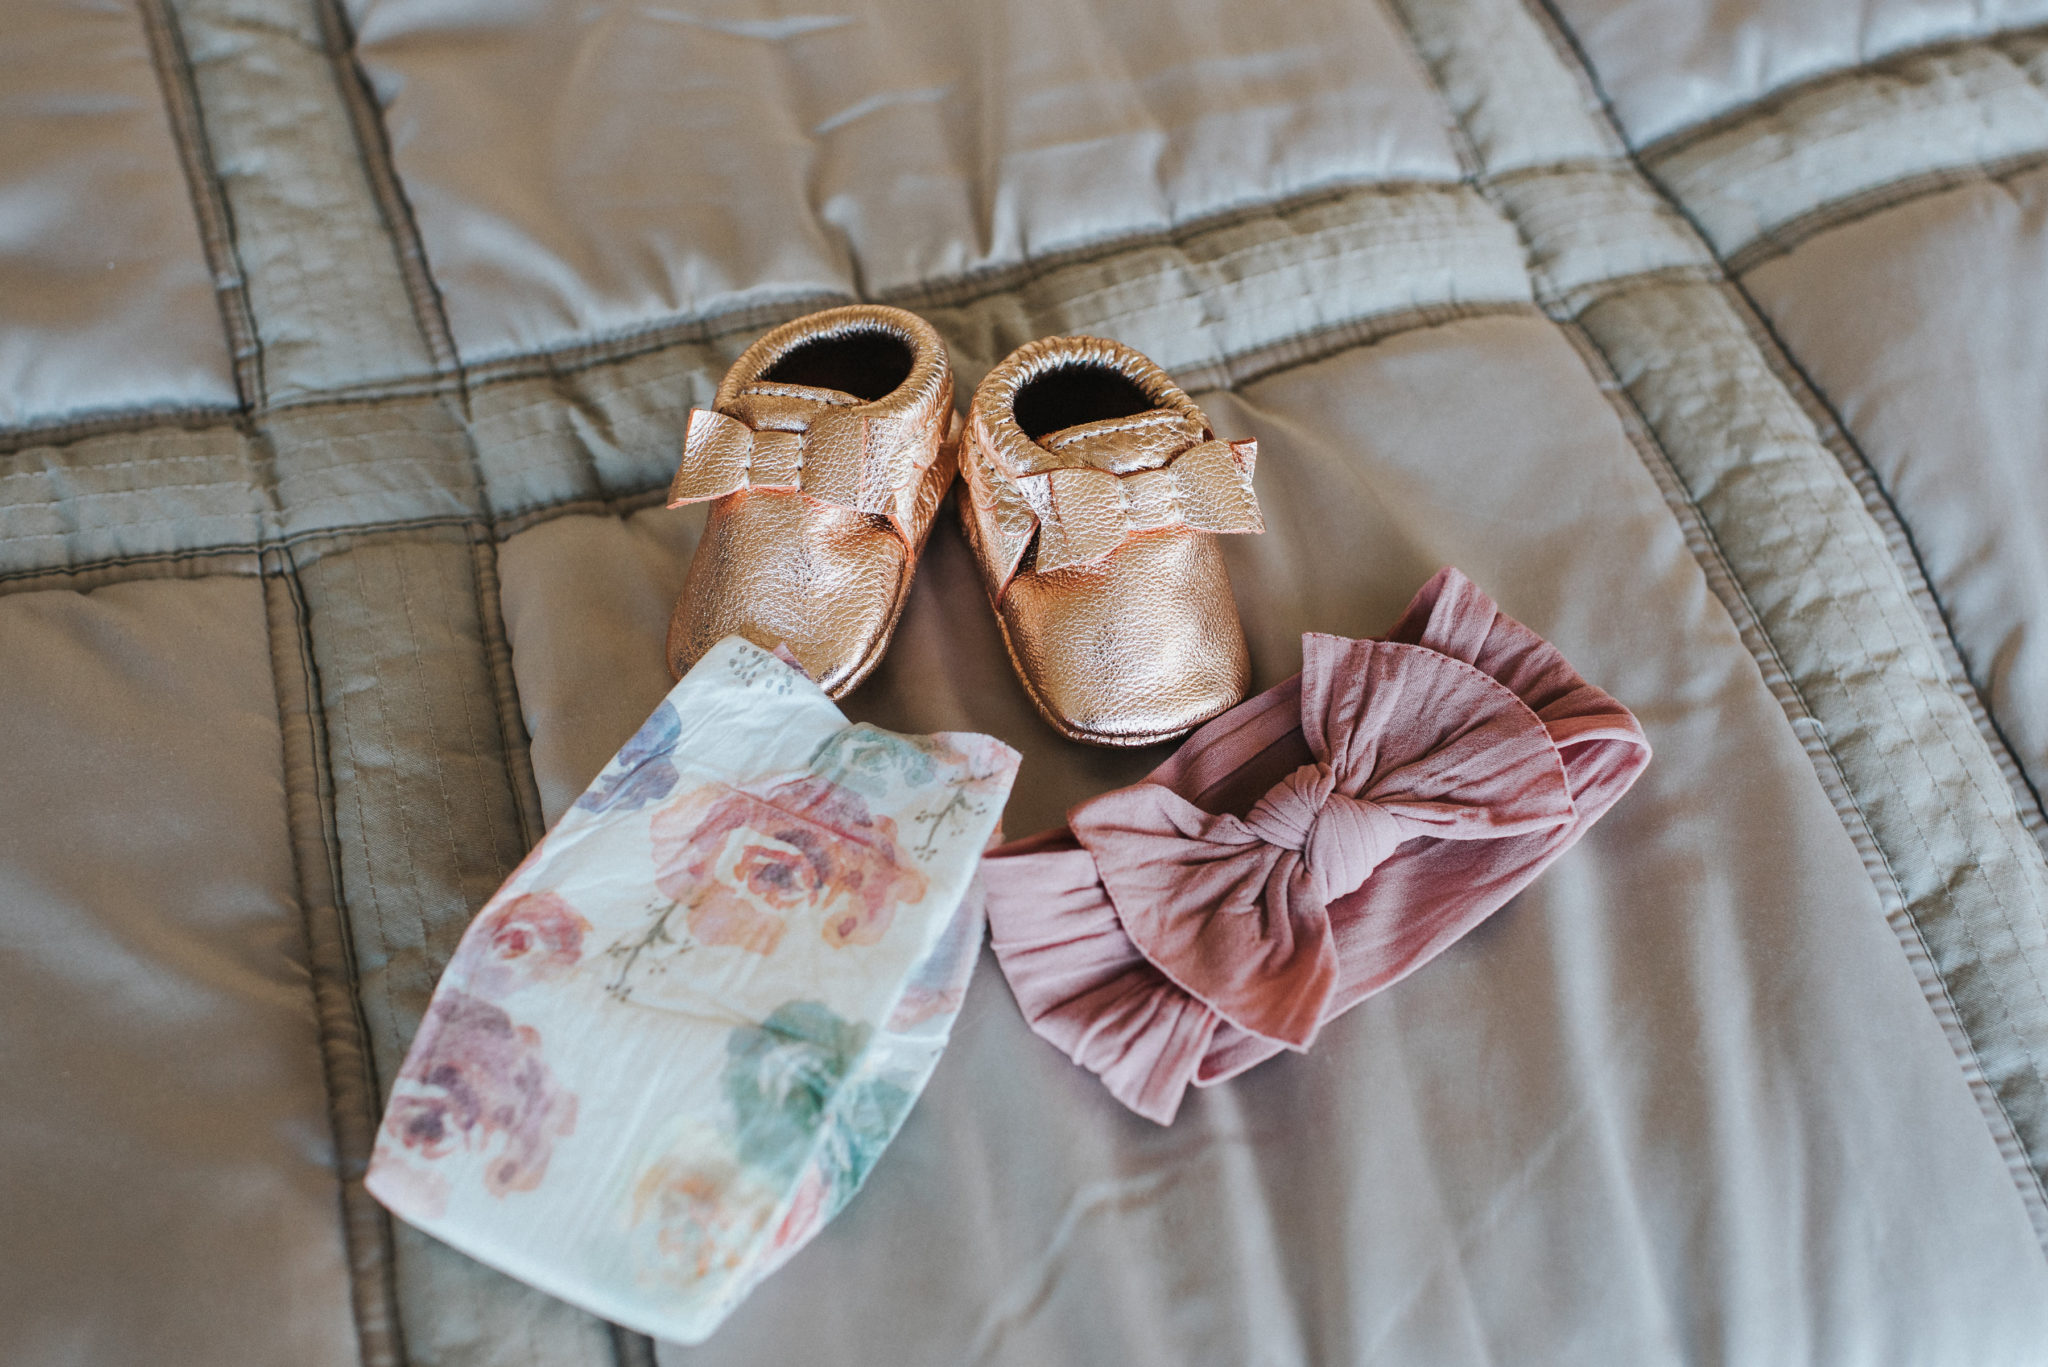 baby girl accessories, its a girl announcement, rose gold baby moccasins, floral diapers - Gender Reveal Idea: It's a ... Boy or Girl?? by popular Las Vegas lifestyle blogger Outfits & Outings